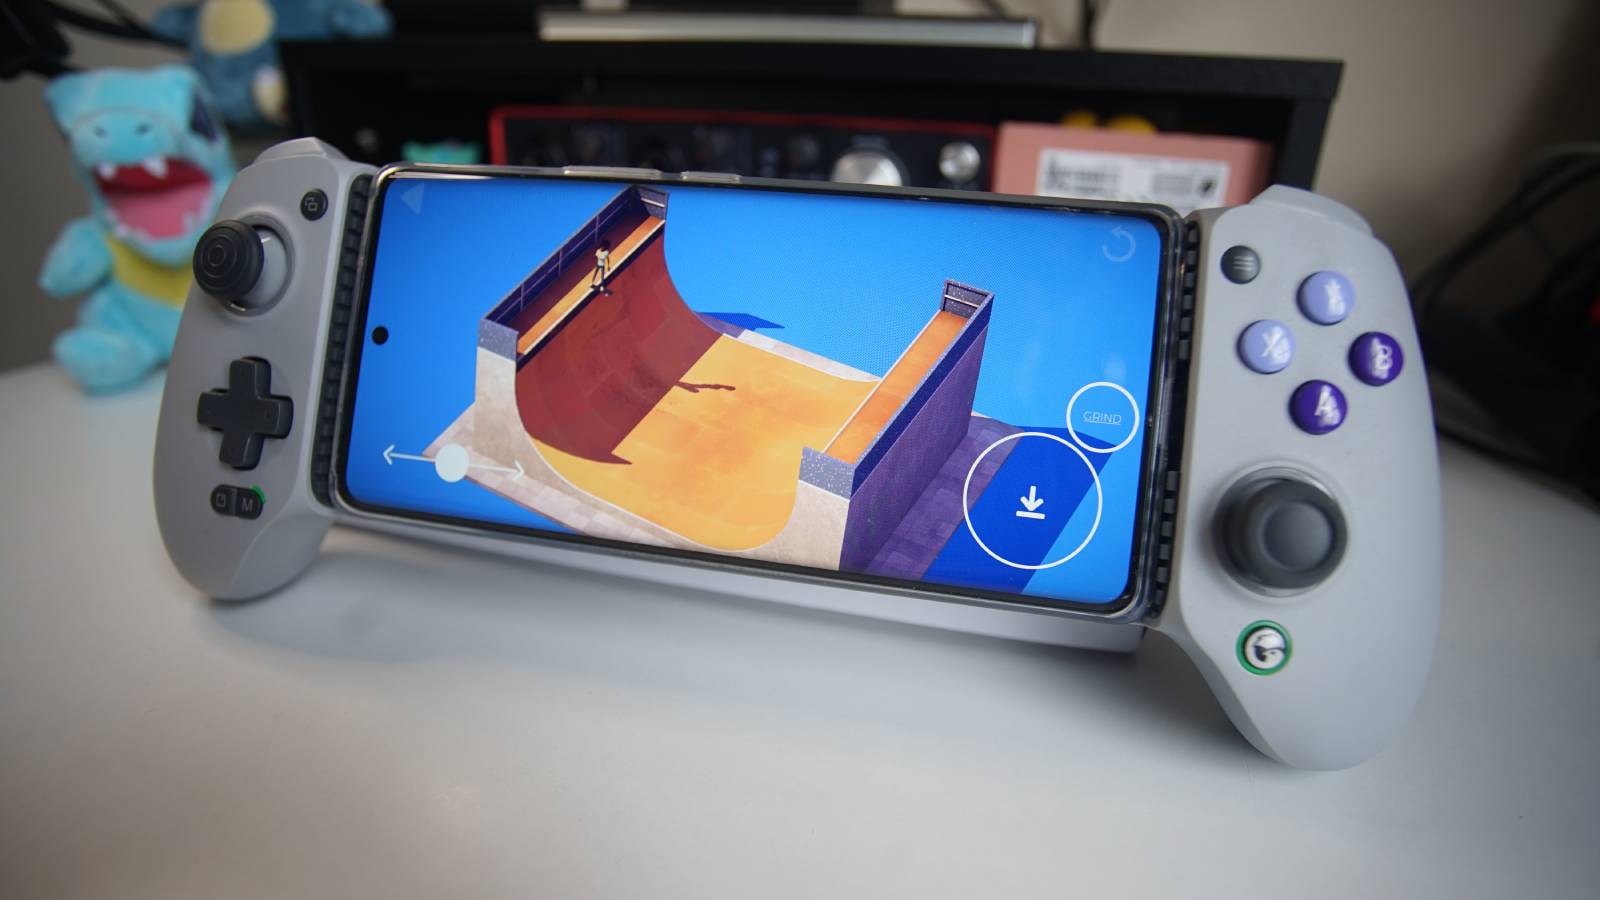 GameSir G8 Galileo review: A new mobile controller contender